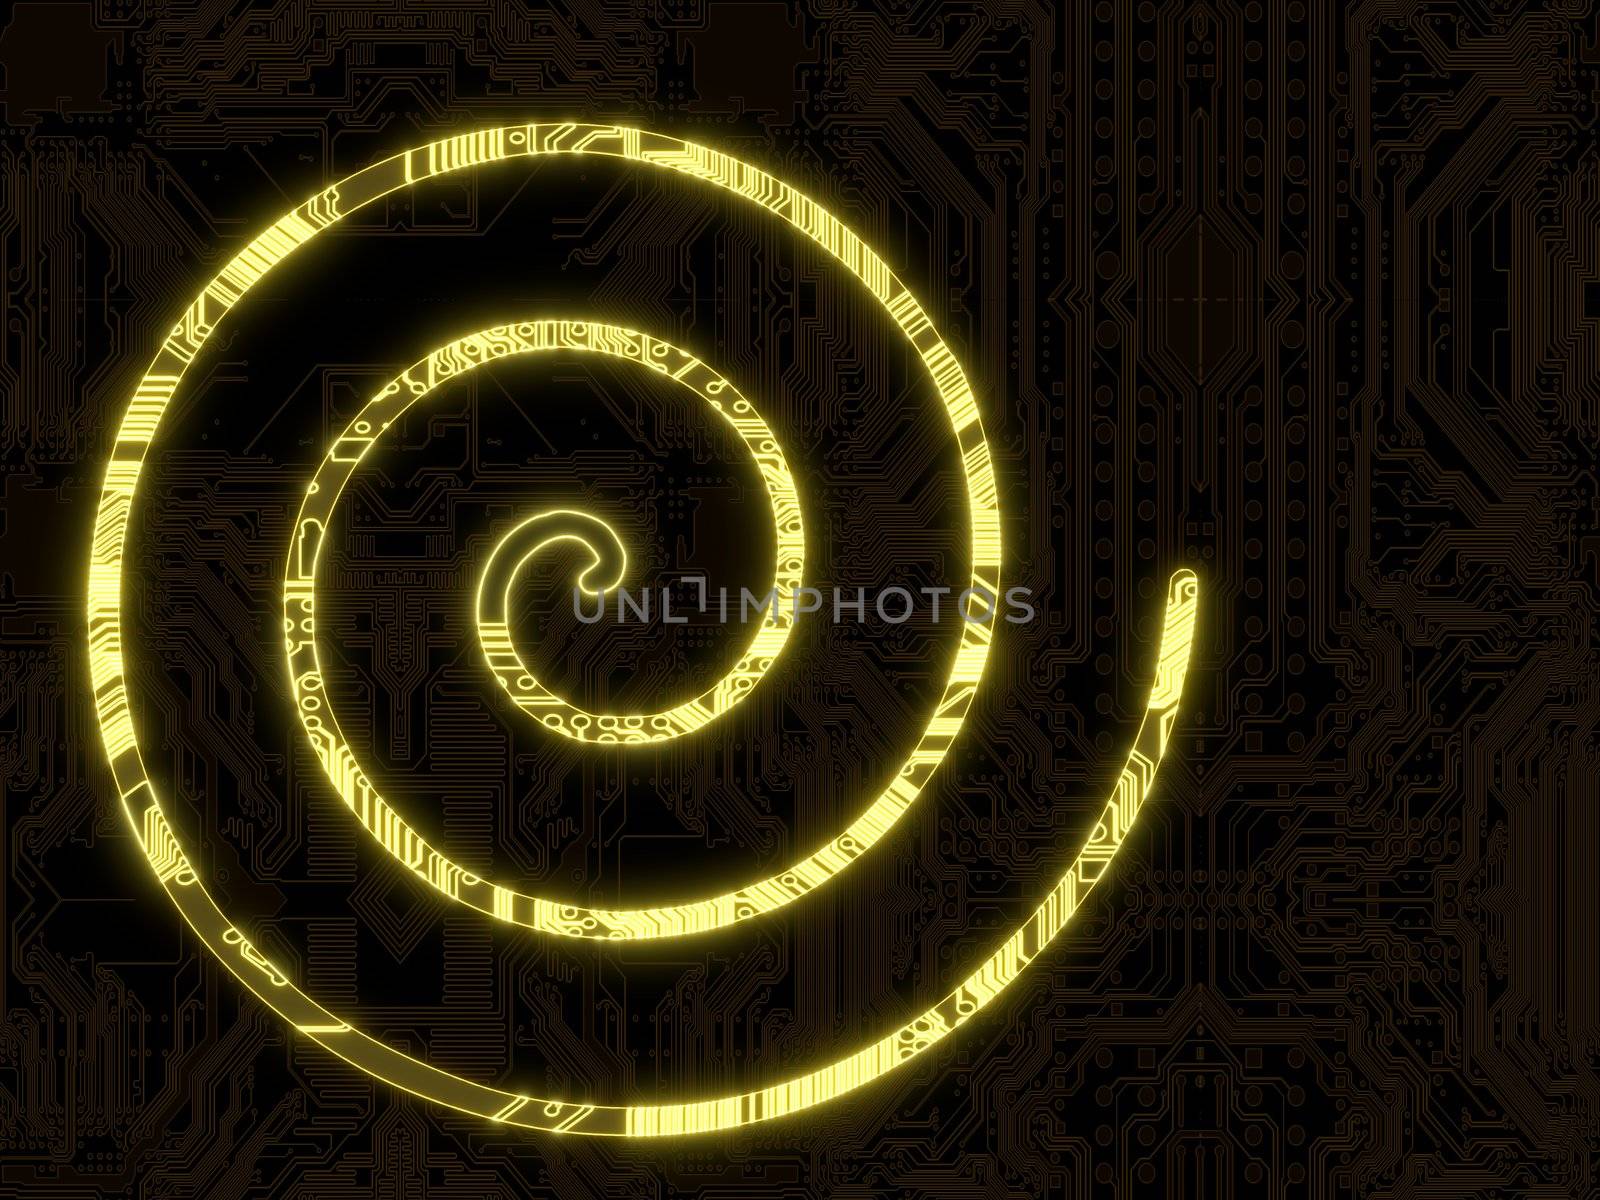 Glowing electronic helix symbol on a computer chip by onirb